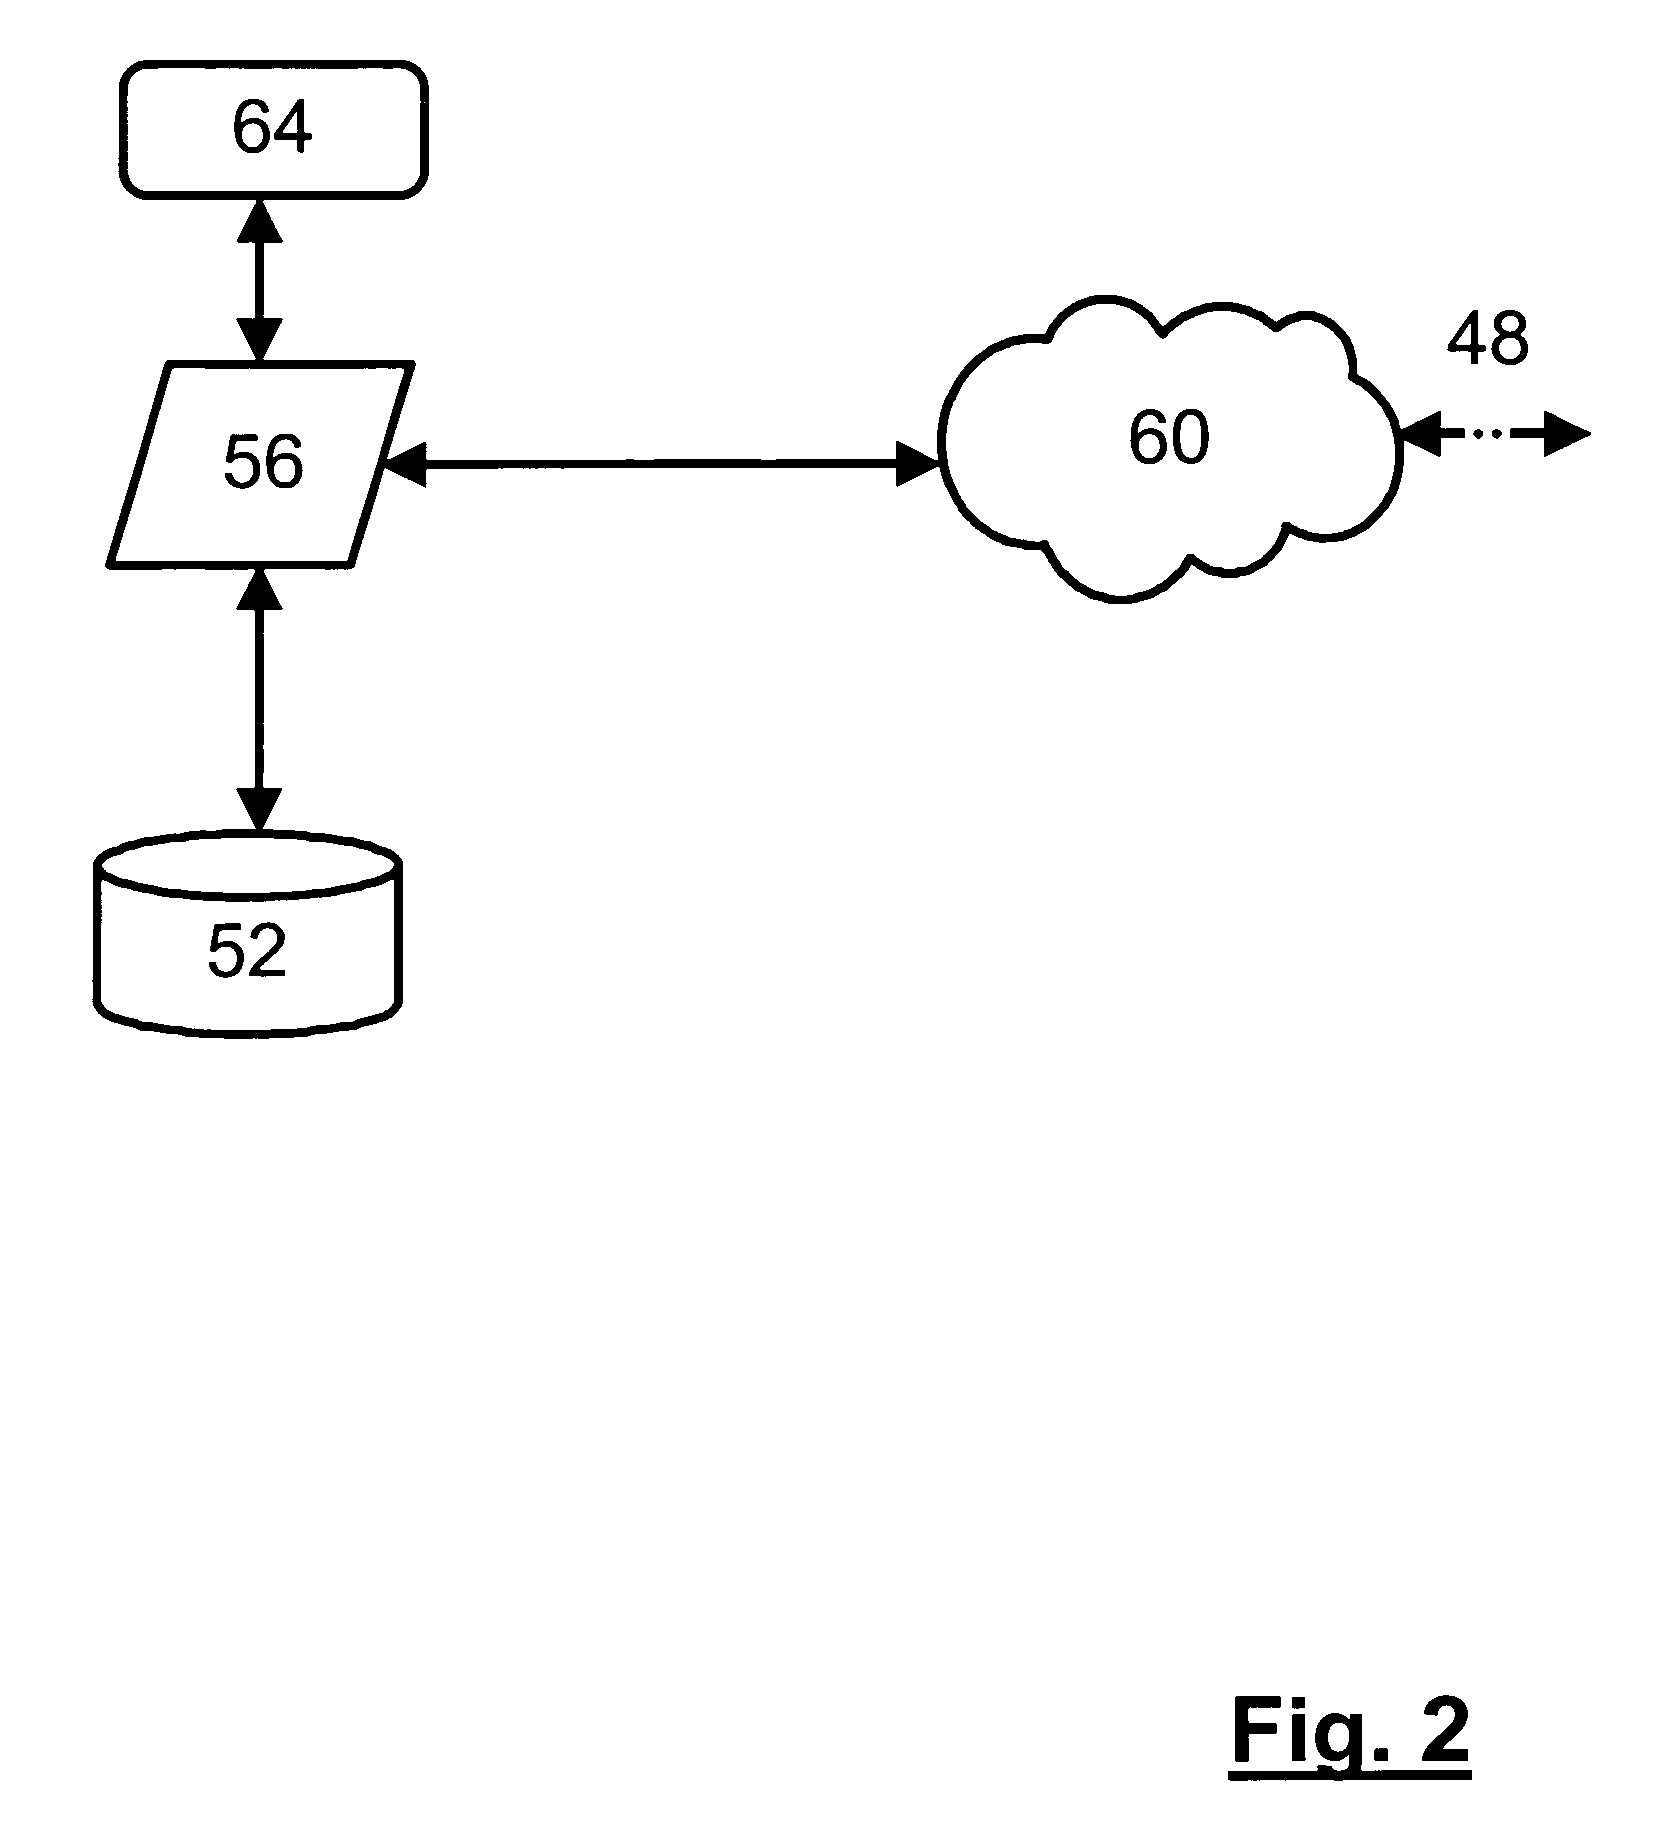 System and method for adaptive programming of a remote control